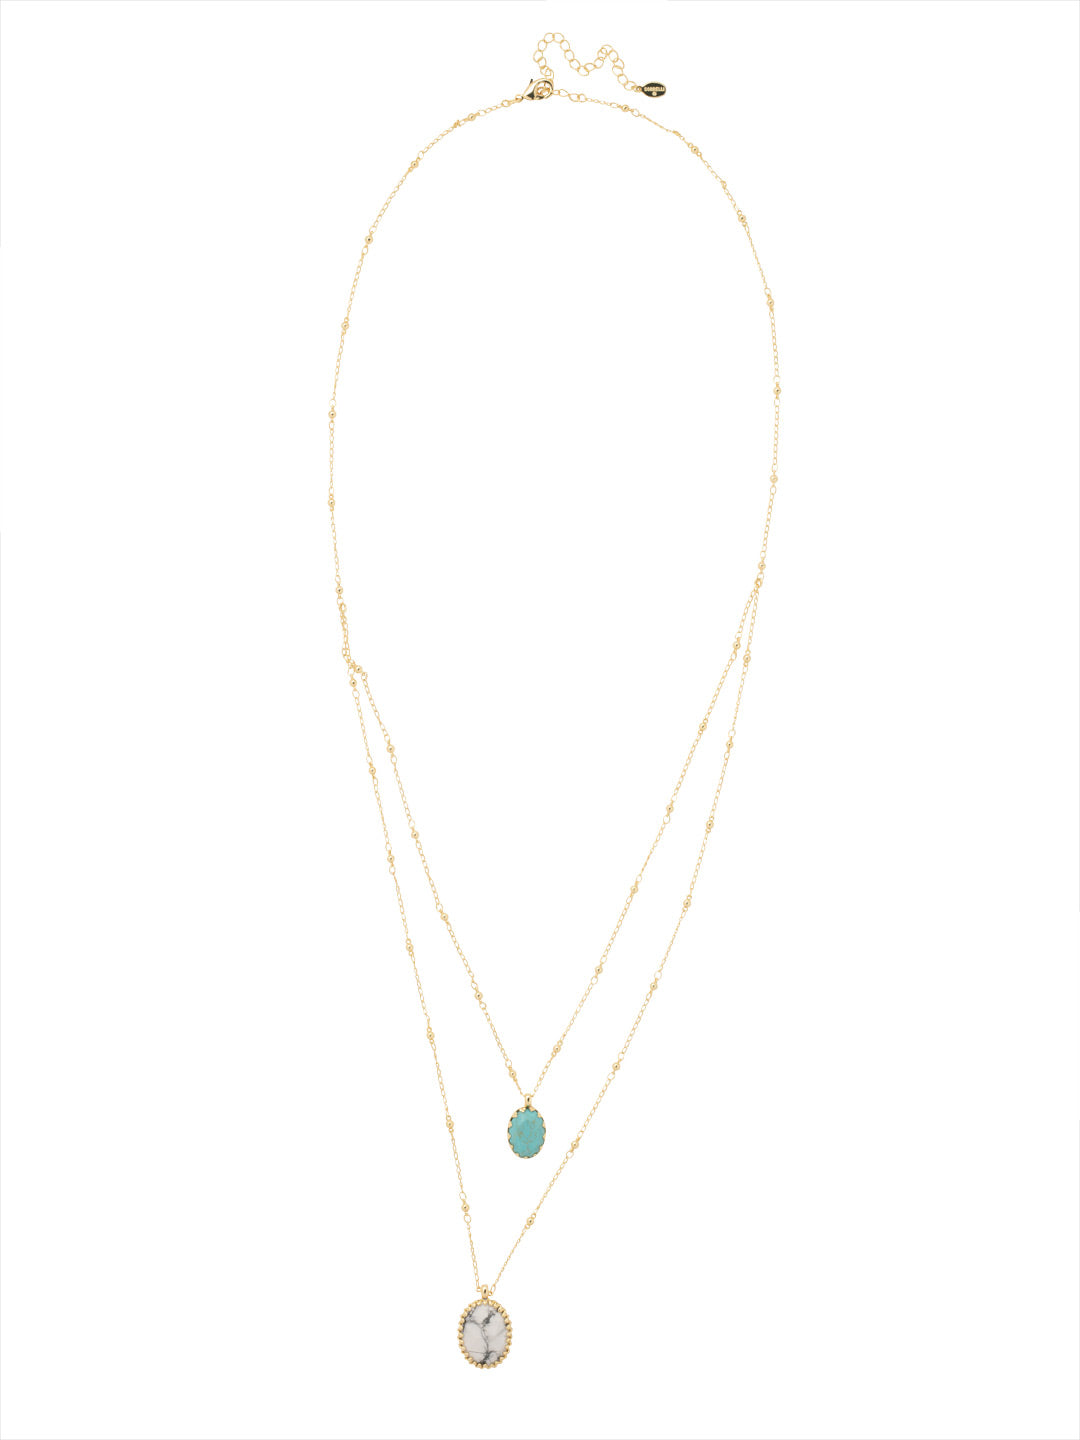 Aubrey Pendant Necklace - NFD44BGSTO - <p>The Aubrey Pendant Necklaces features two chains with semi-precious oval pendants, creating a single effortless layered look. From Sorrelli's Santorini collection in our Bright Gold-tone finish.</p>